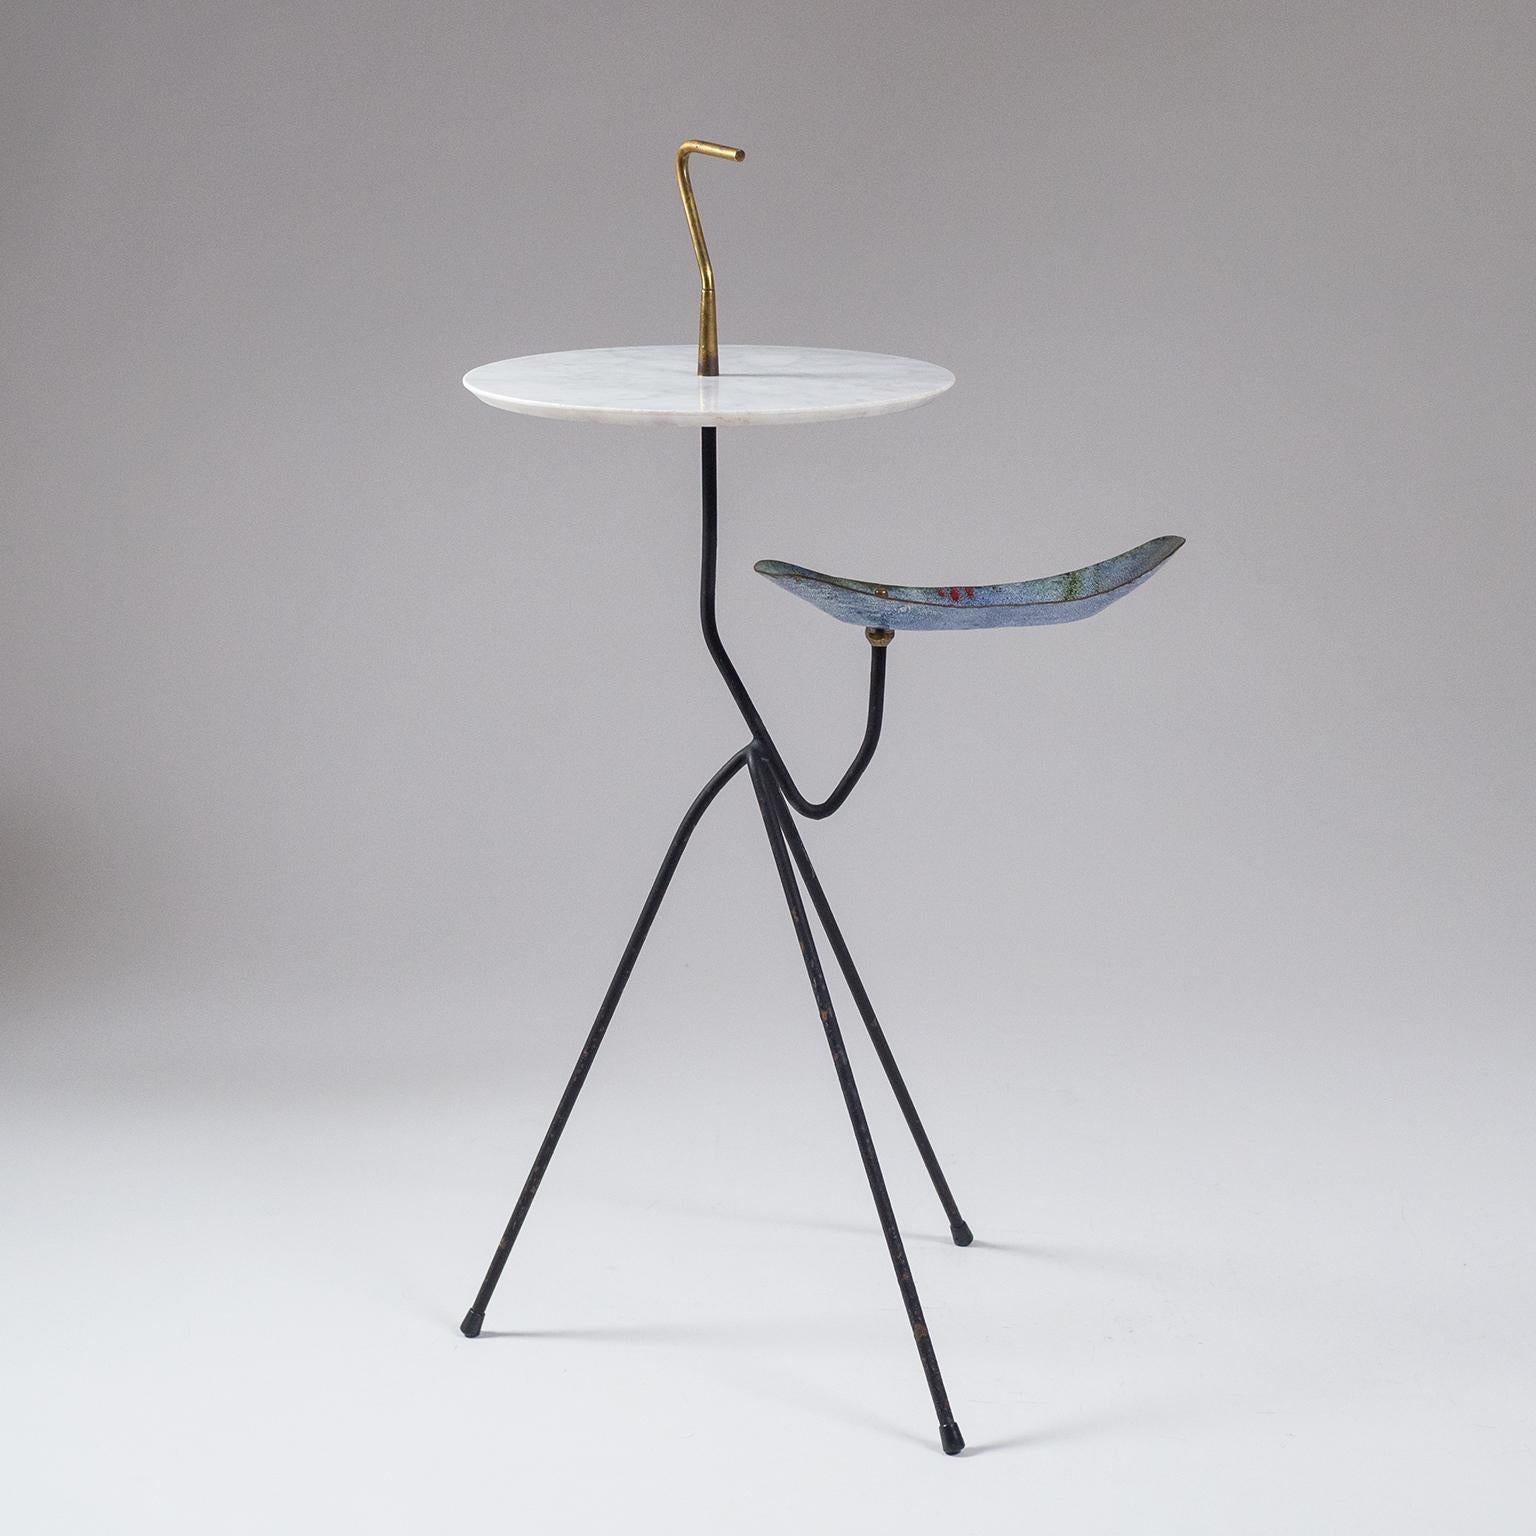 Exceptional Italian midcentury smokers table or side table with integrated catch-all. A very sculptural design with an organically shaped steel tripod base, a round white marble tabletop and brass grip finial. Underneath the marble top is an